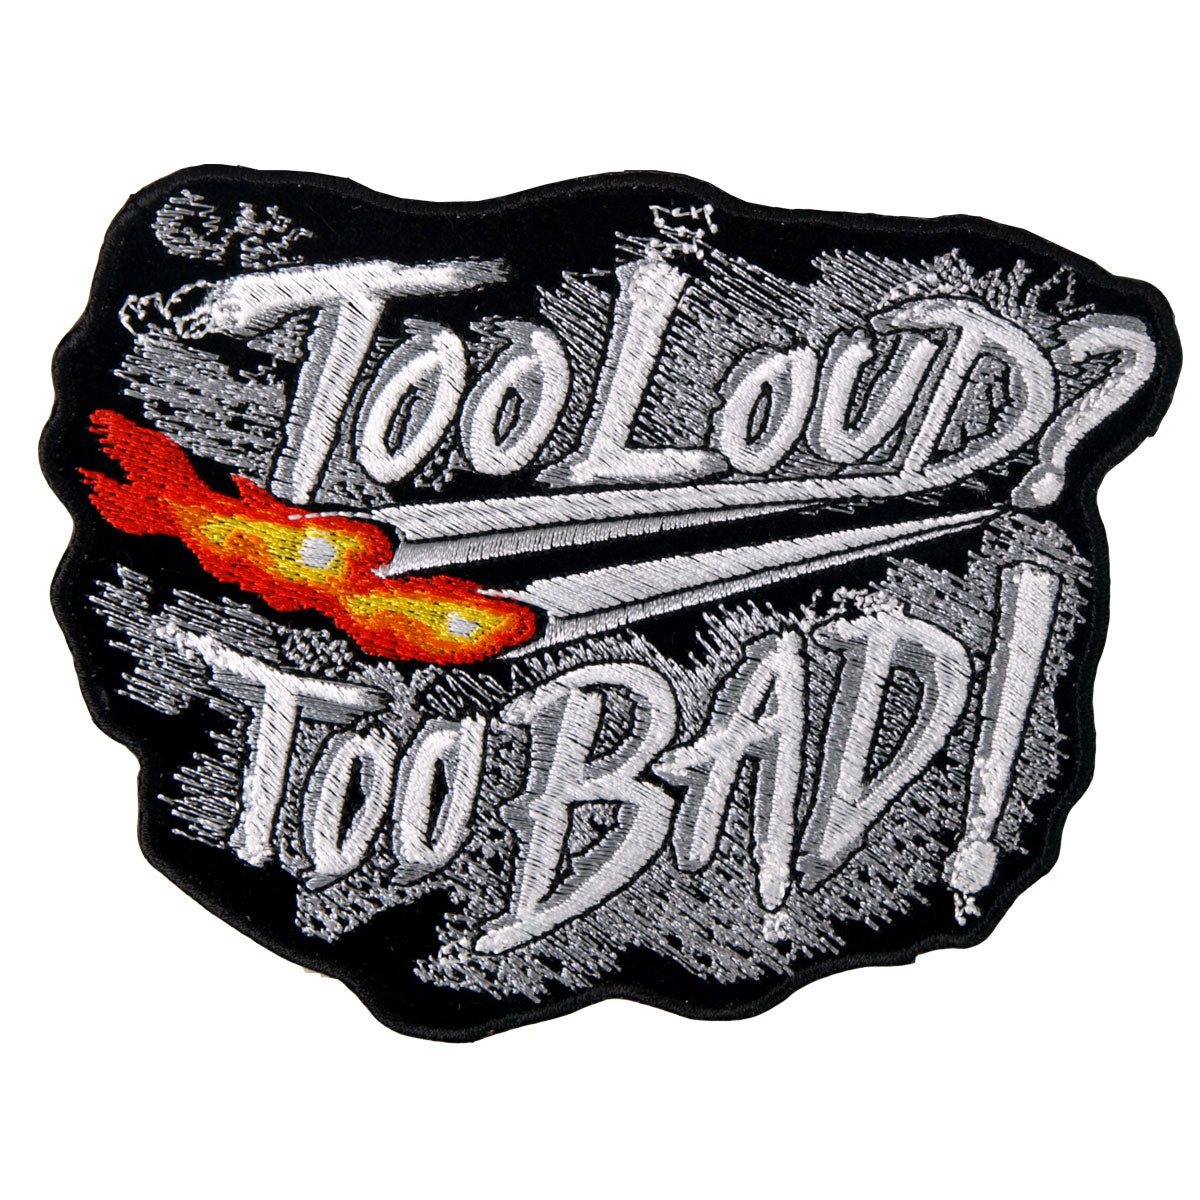 Hot Leathers PPA4160 Too Loud Too Bad 5" x 4" Patch